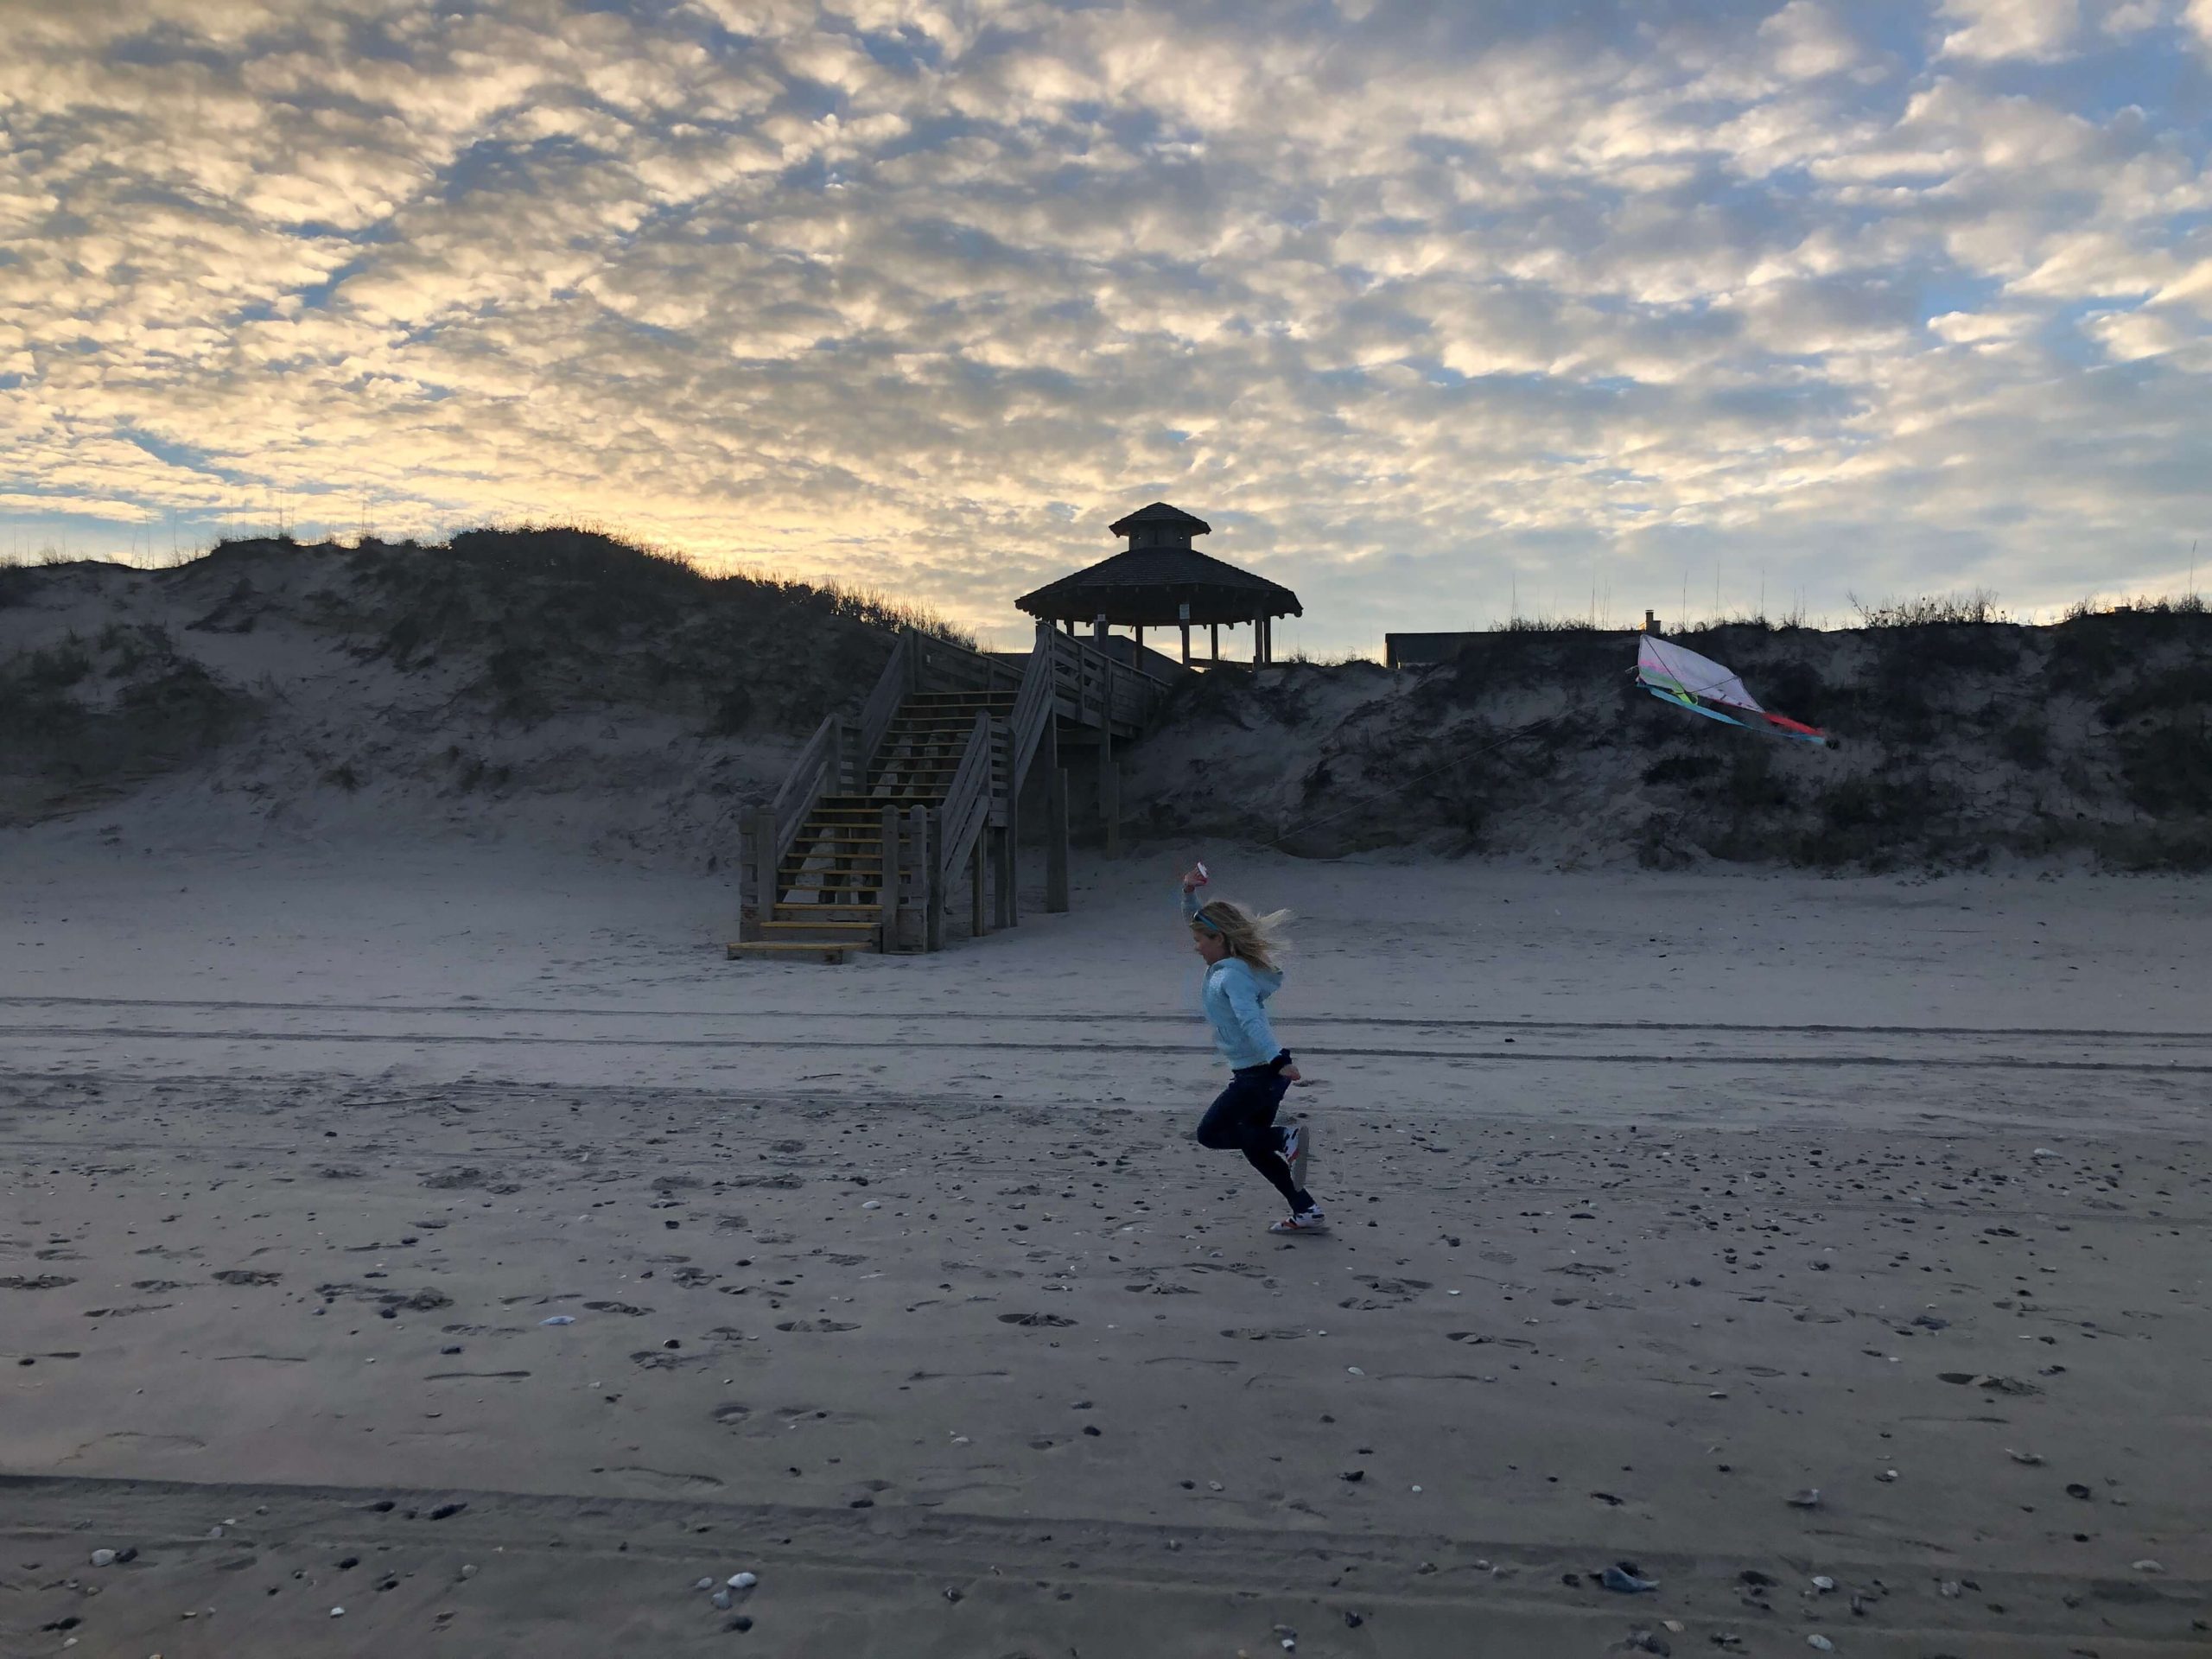 a young girl runs across the beach pulling a kite